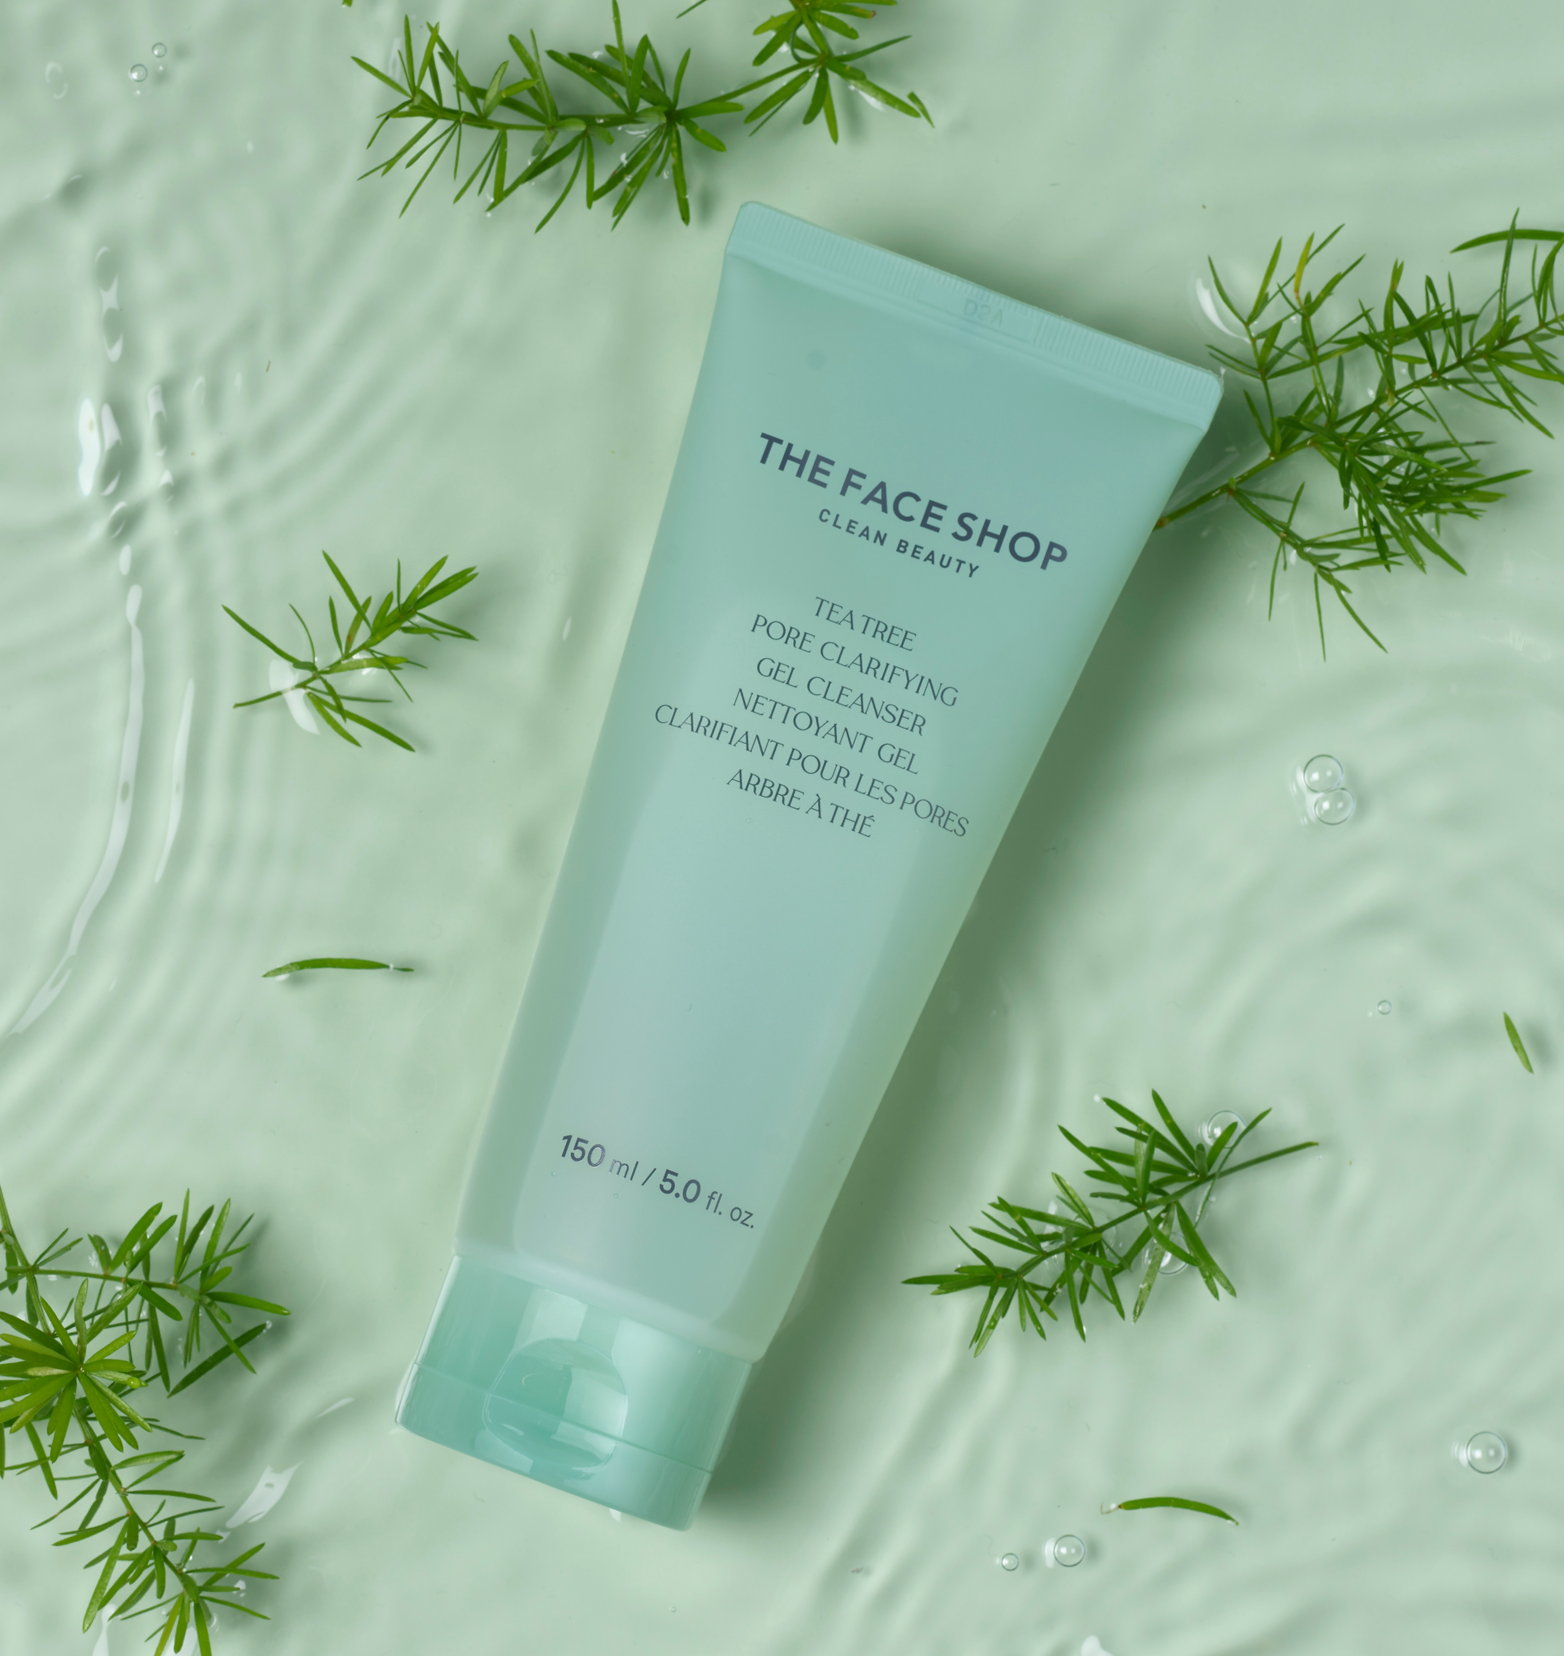 A light green tube of The Face Shop Tea Tree Pore Clarifying Gel Cleanser over a light green liquid surface with green Tea Tree twigs scattered around